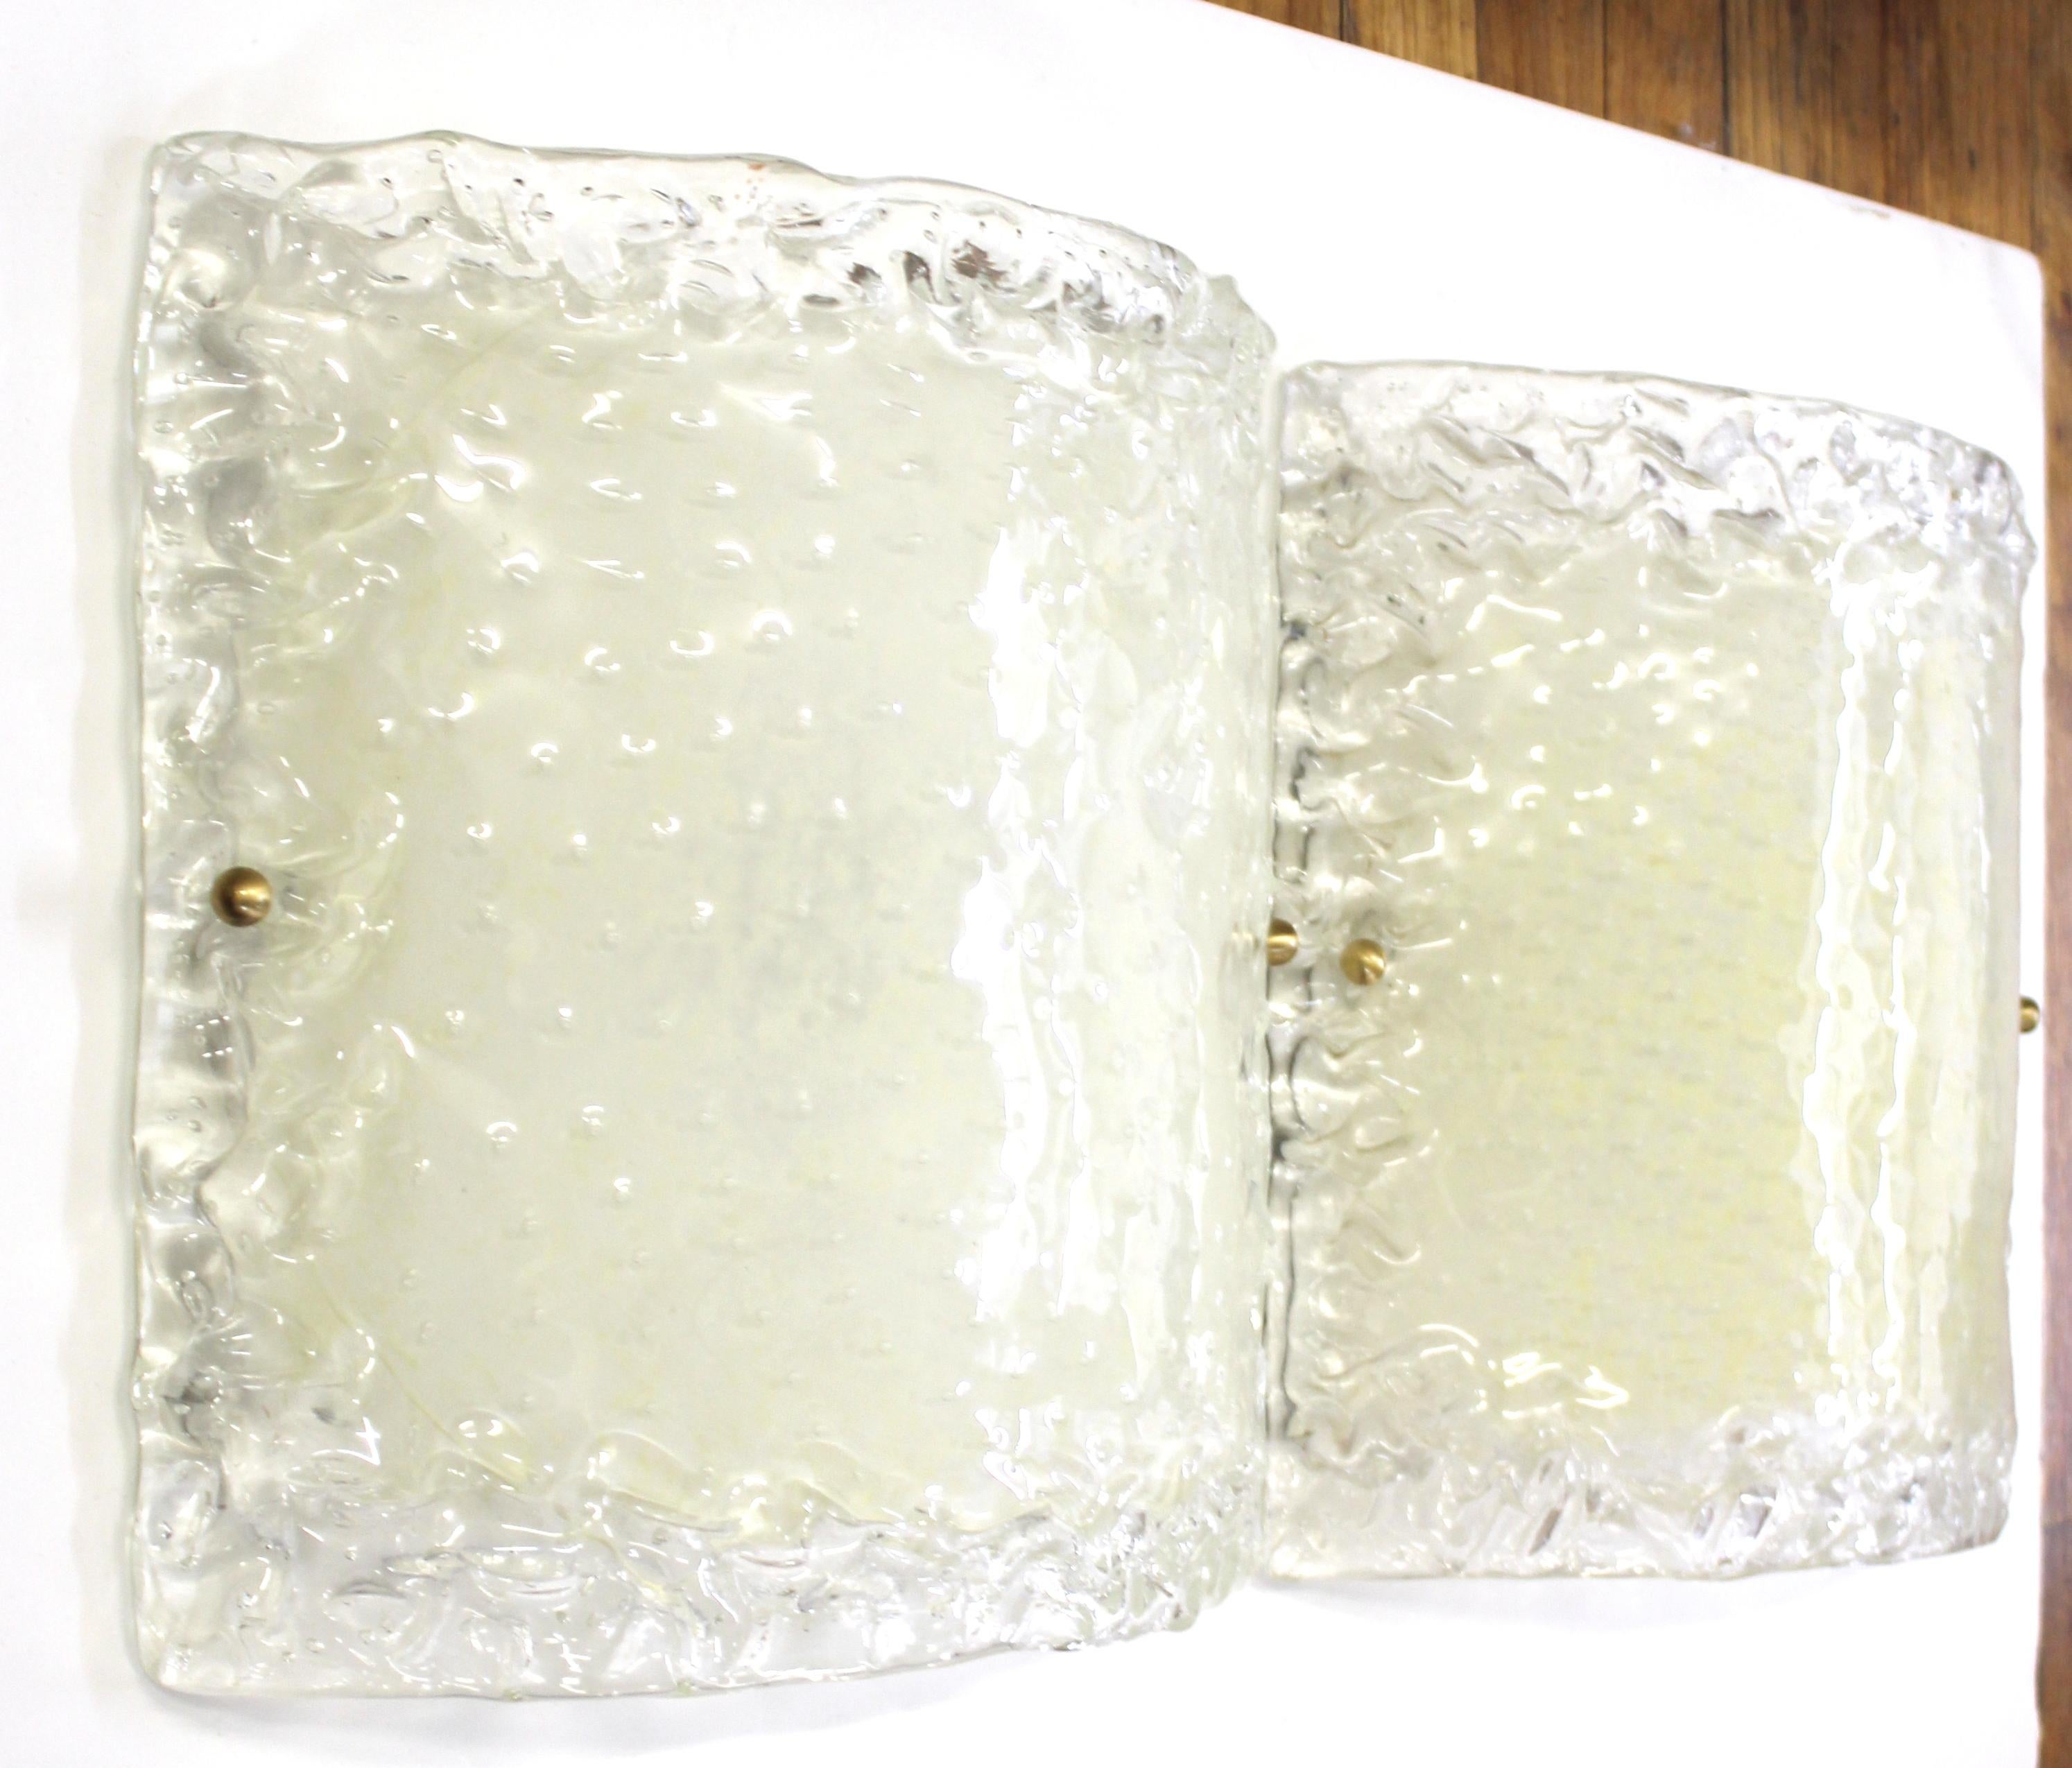 Italian Modern pair of sconces made in Murano glass during the mid-late 20th century. The pair is in great vintage condition with some age-appropriate wear.